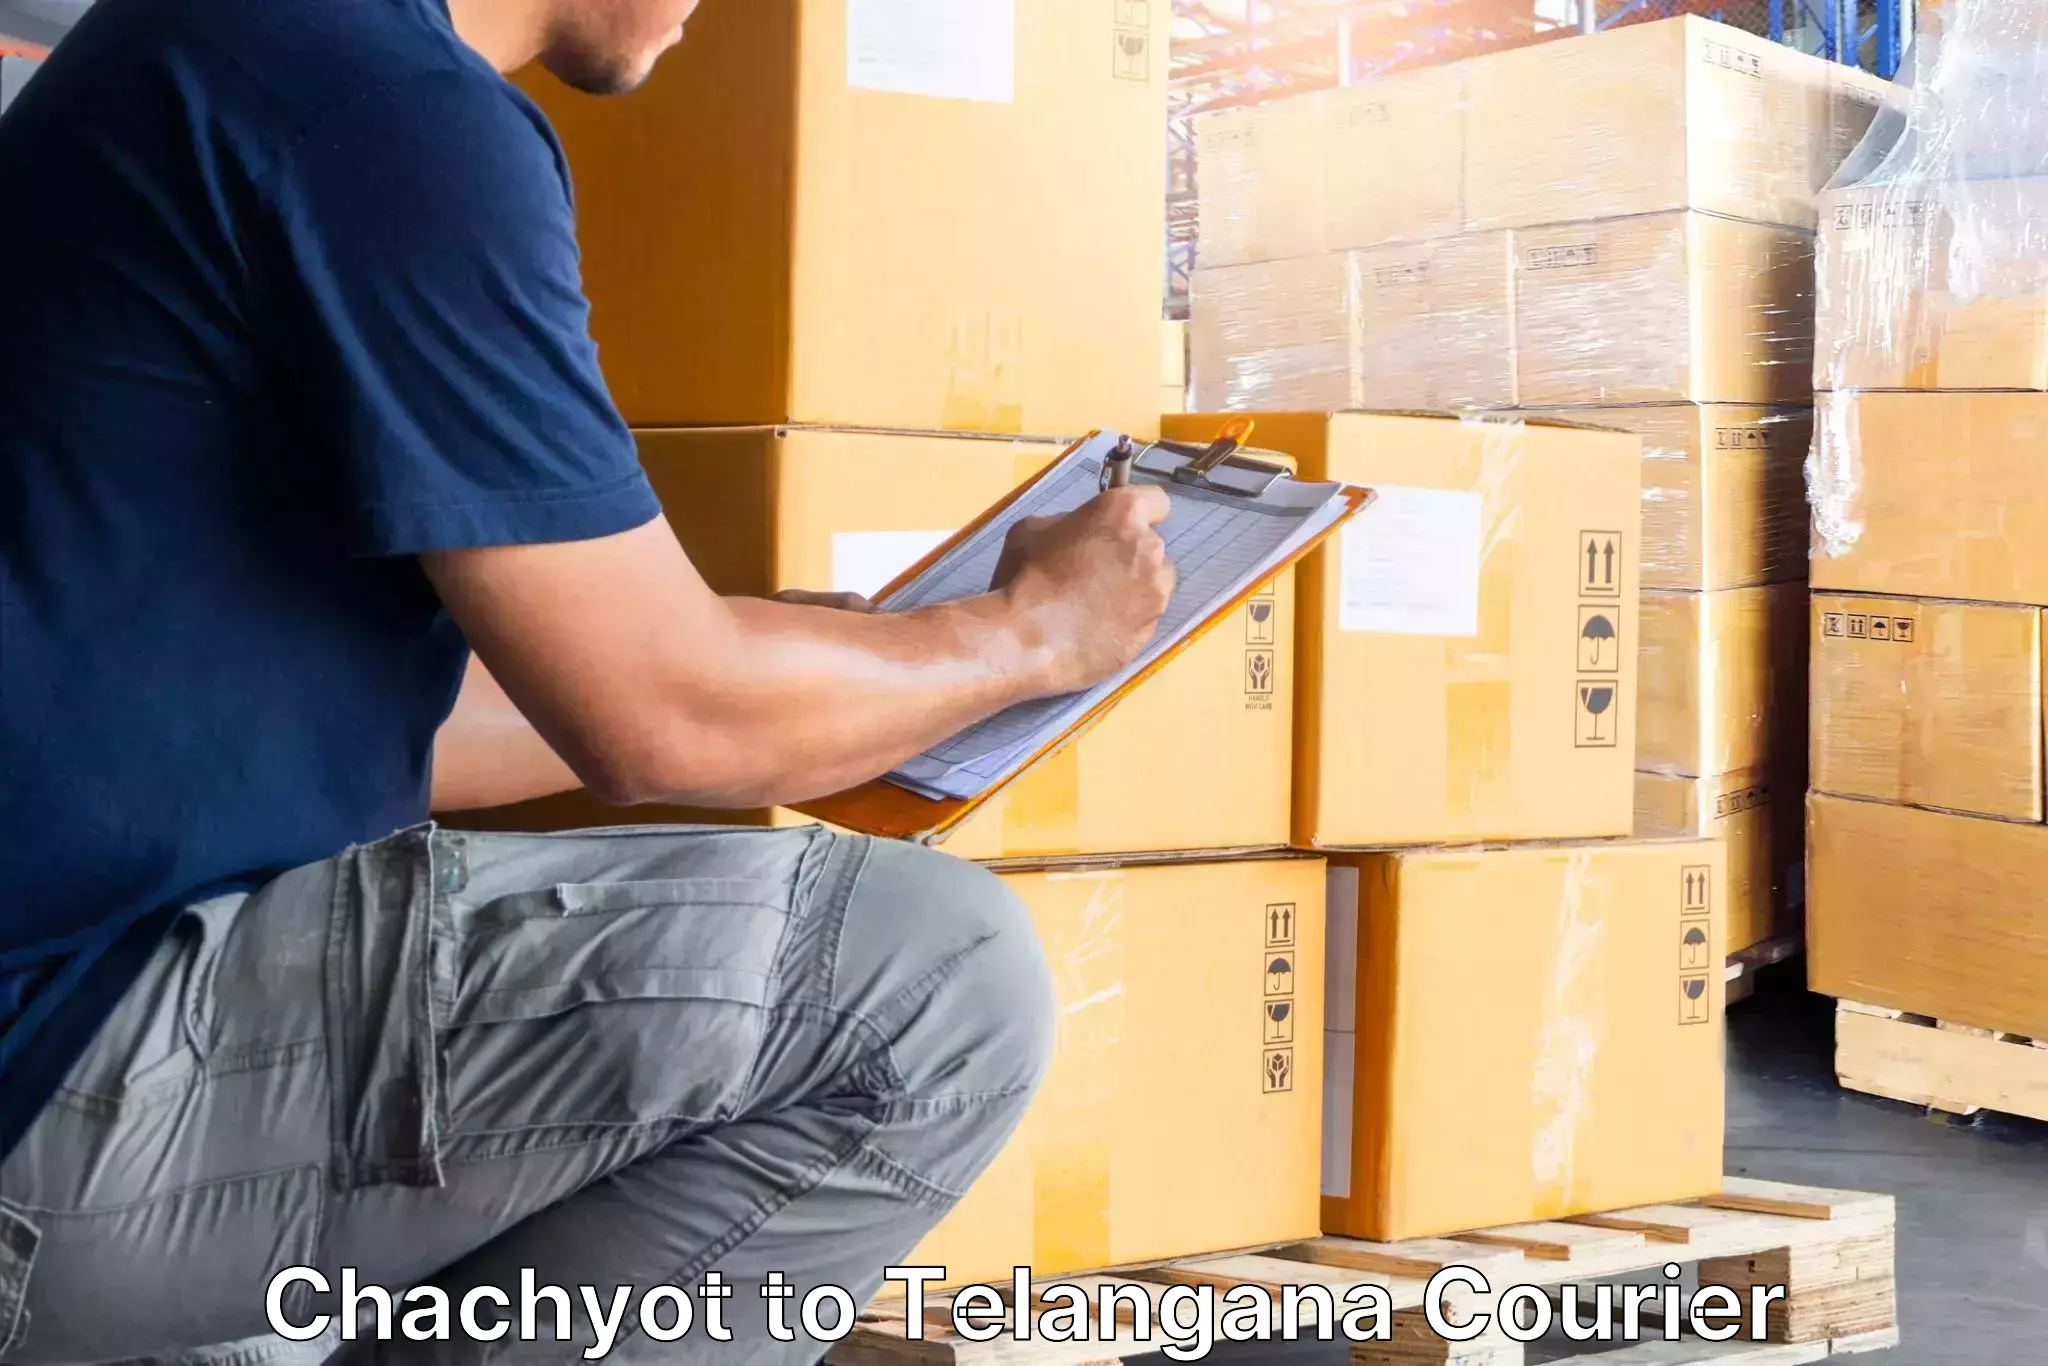 Efficient relocation services Chachyot to Odela